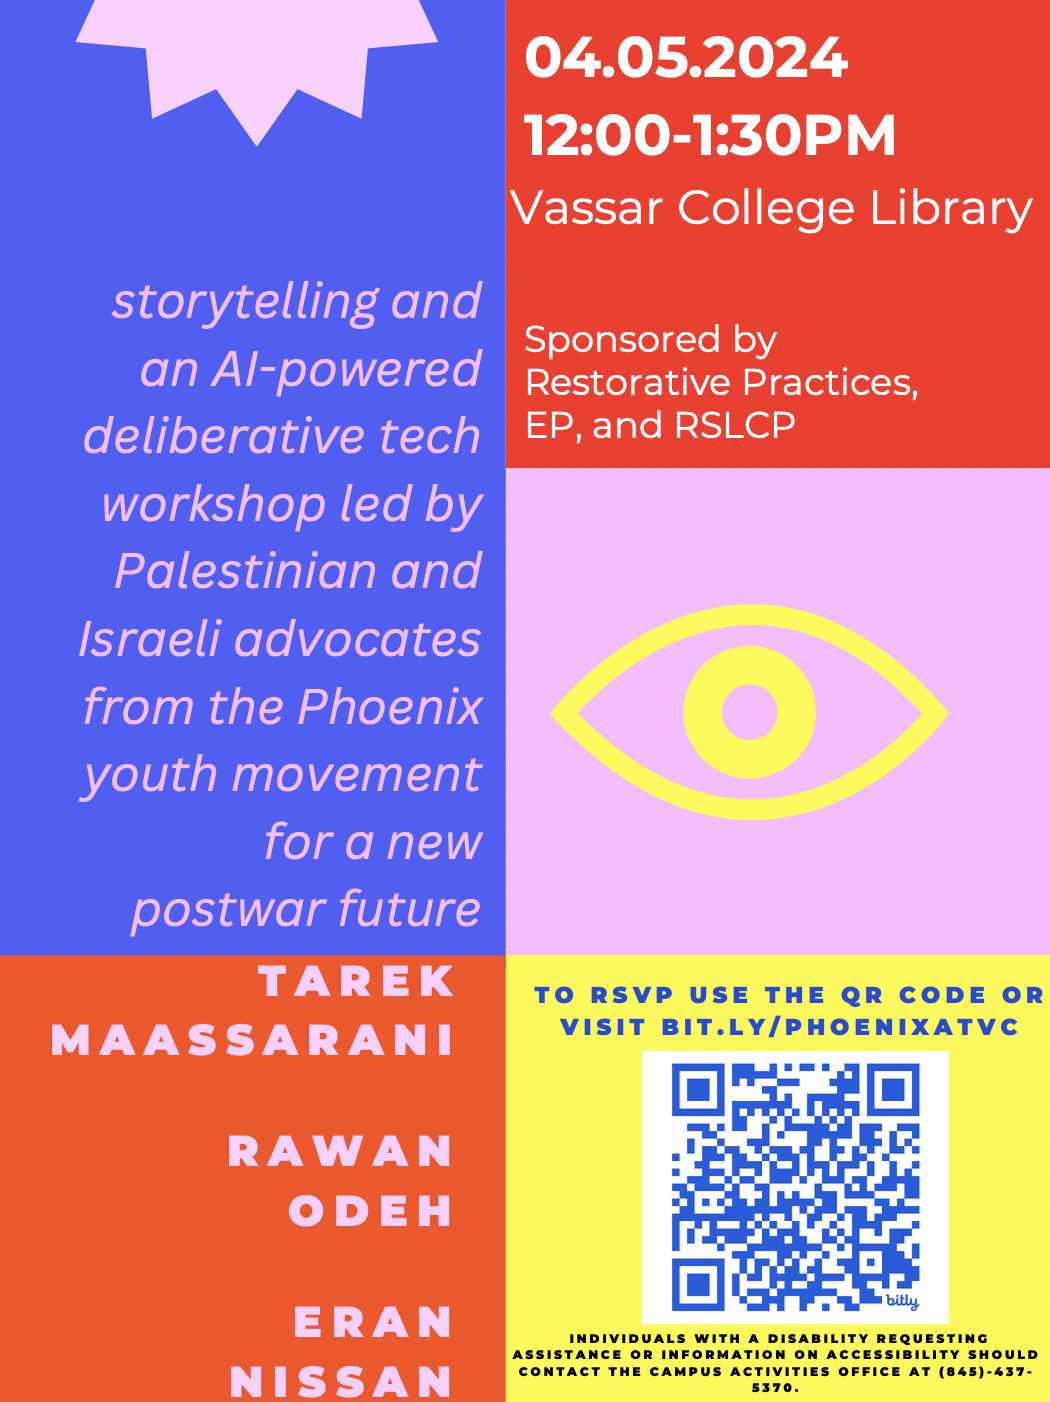 A colorful poster with the text "storytelling and an Al-powered deliberative tech workshop led by Palestinian and Israeli advocates Sponsored by Restorative Practices, EP, and RSLCP from the Phoenix youth movement for a new postwar future" on it.